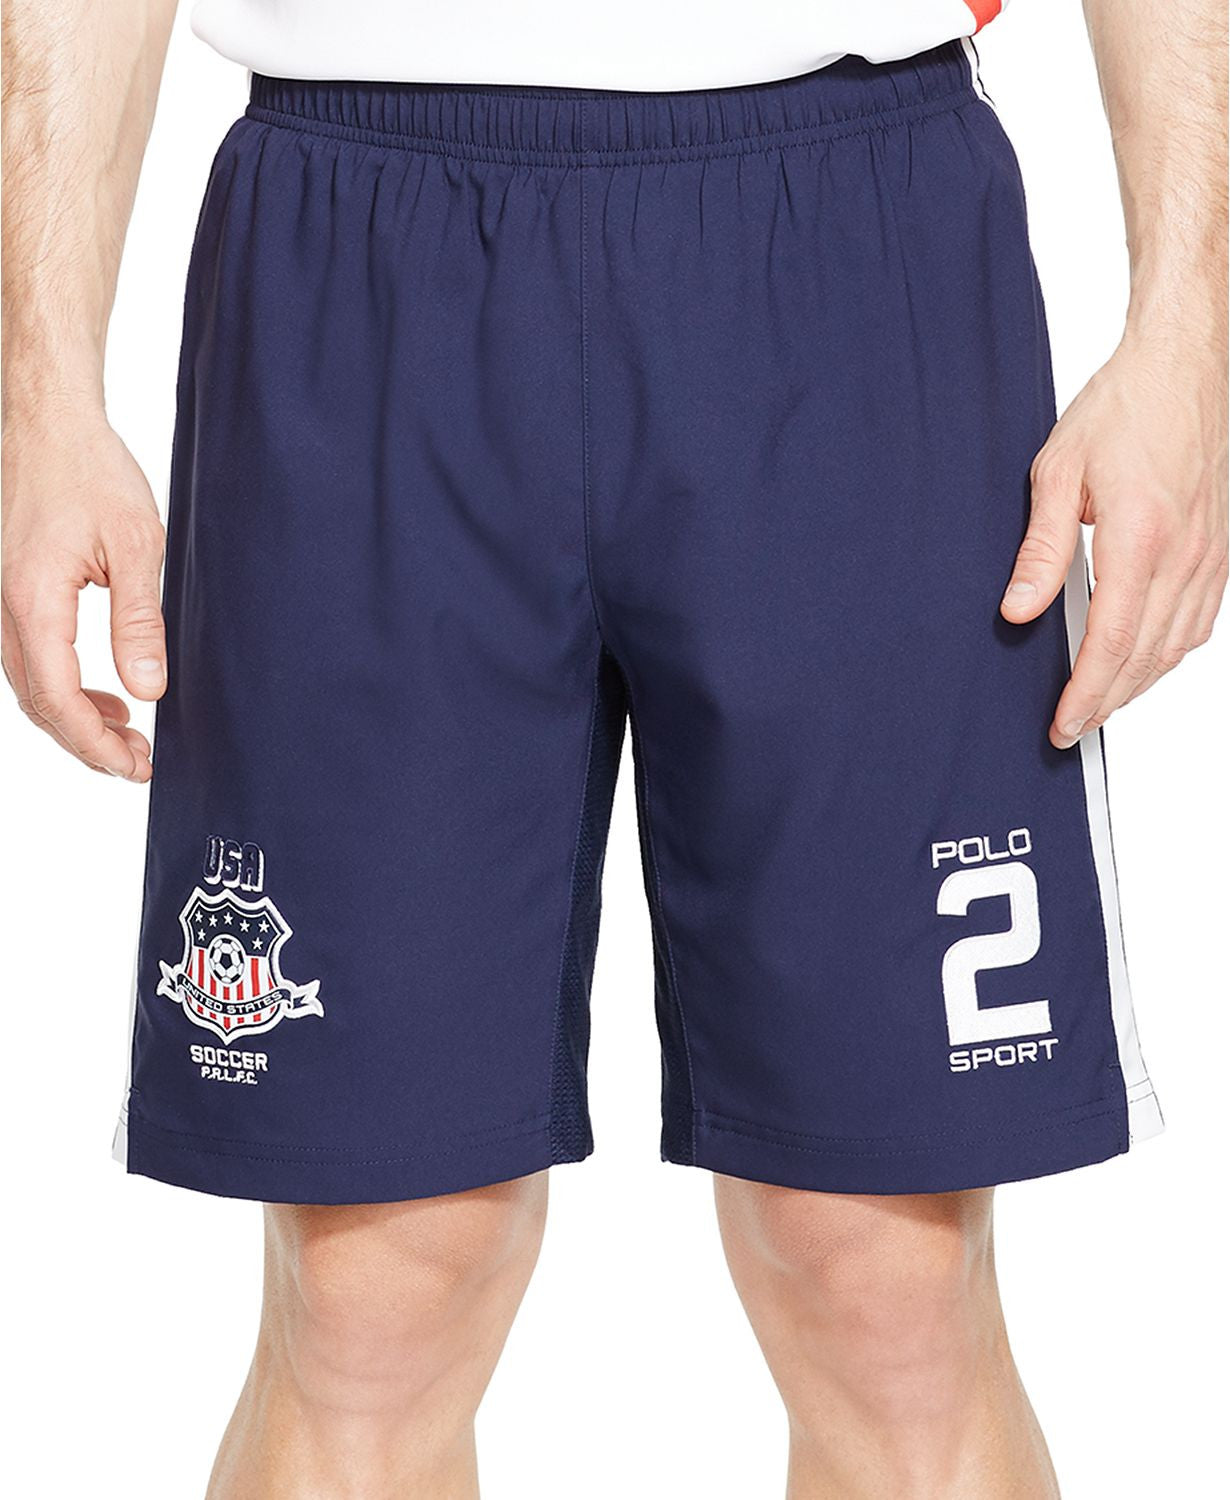 Polo Sport Usa Soccer Compression Shorts French Navy